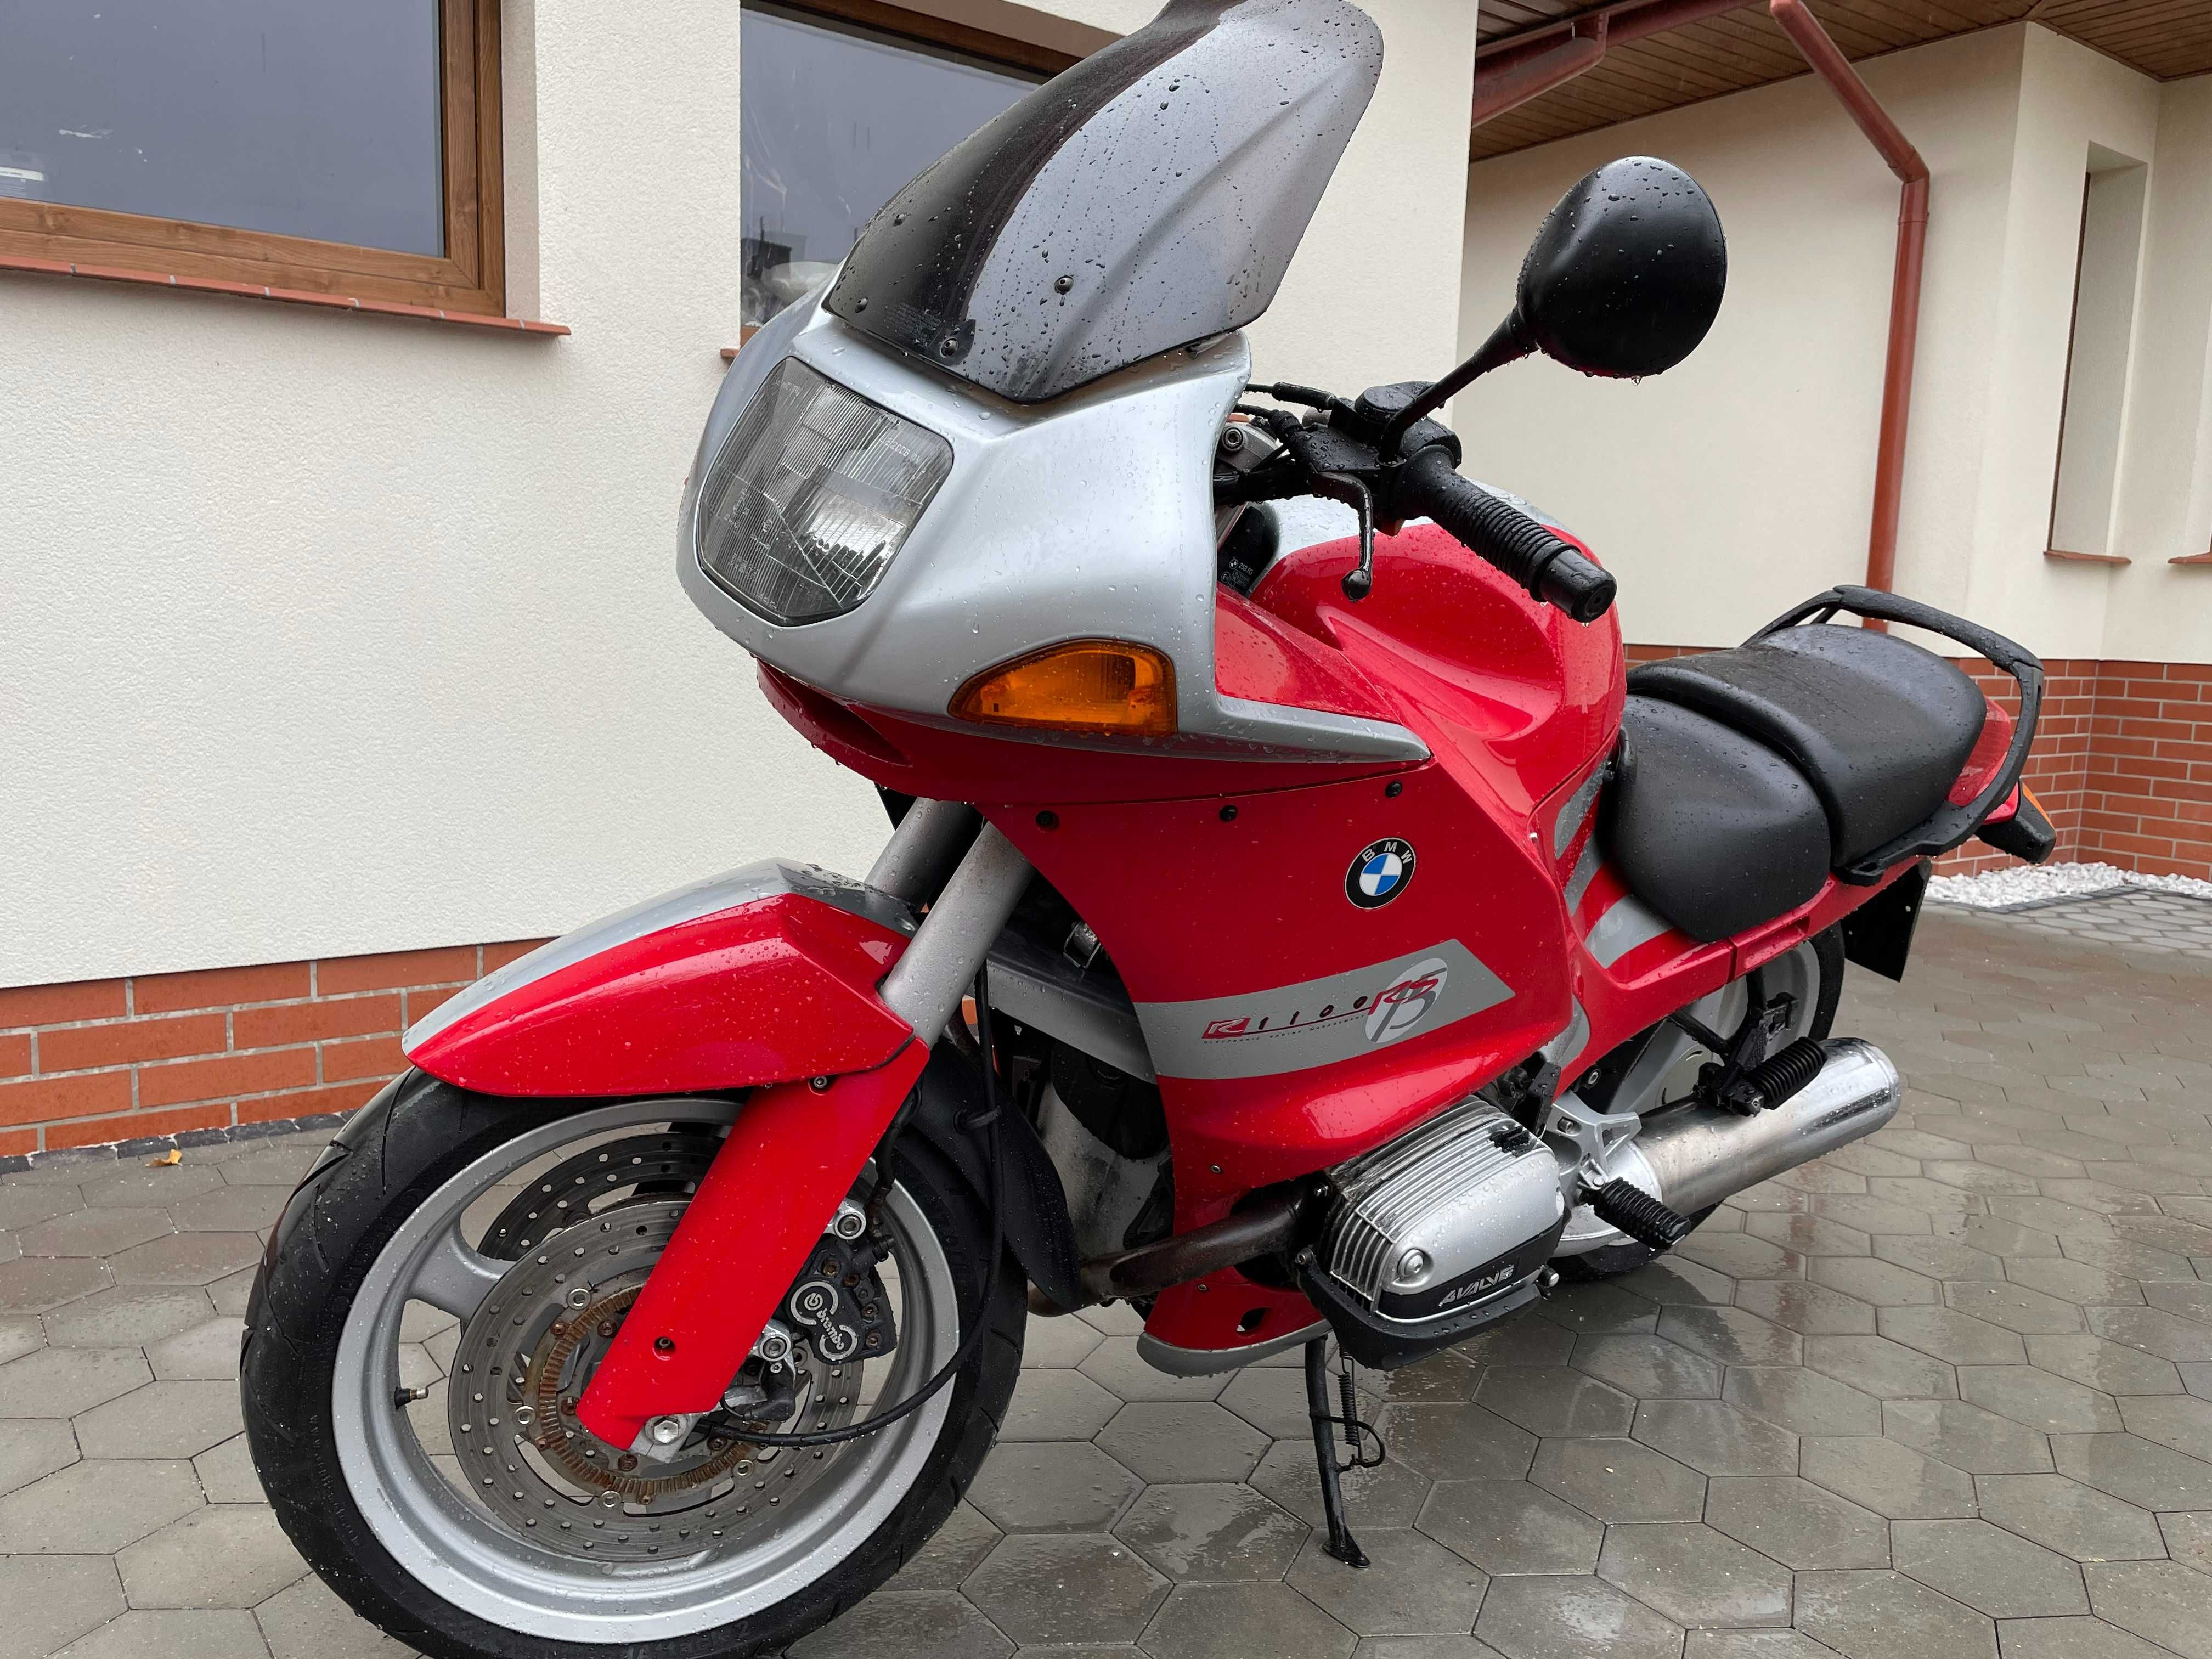 BMW R1100 RS red RATY